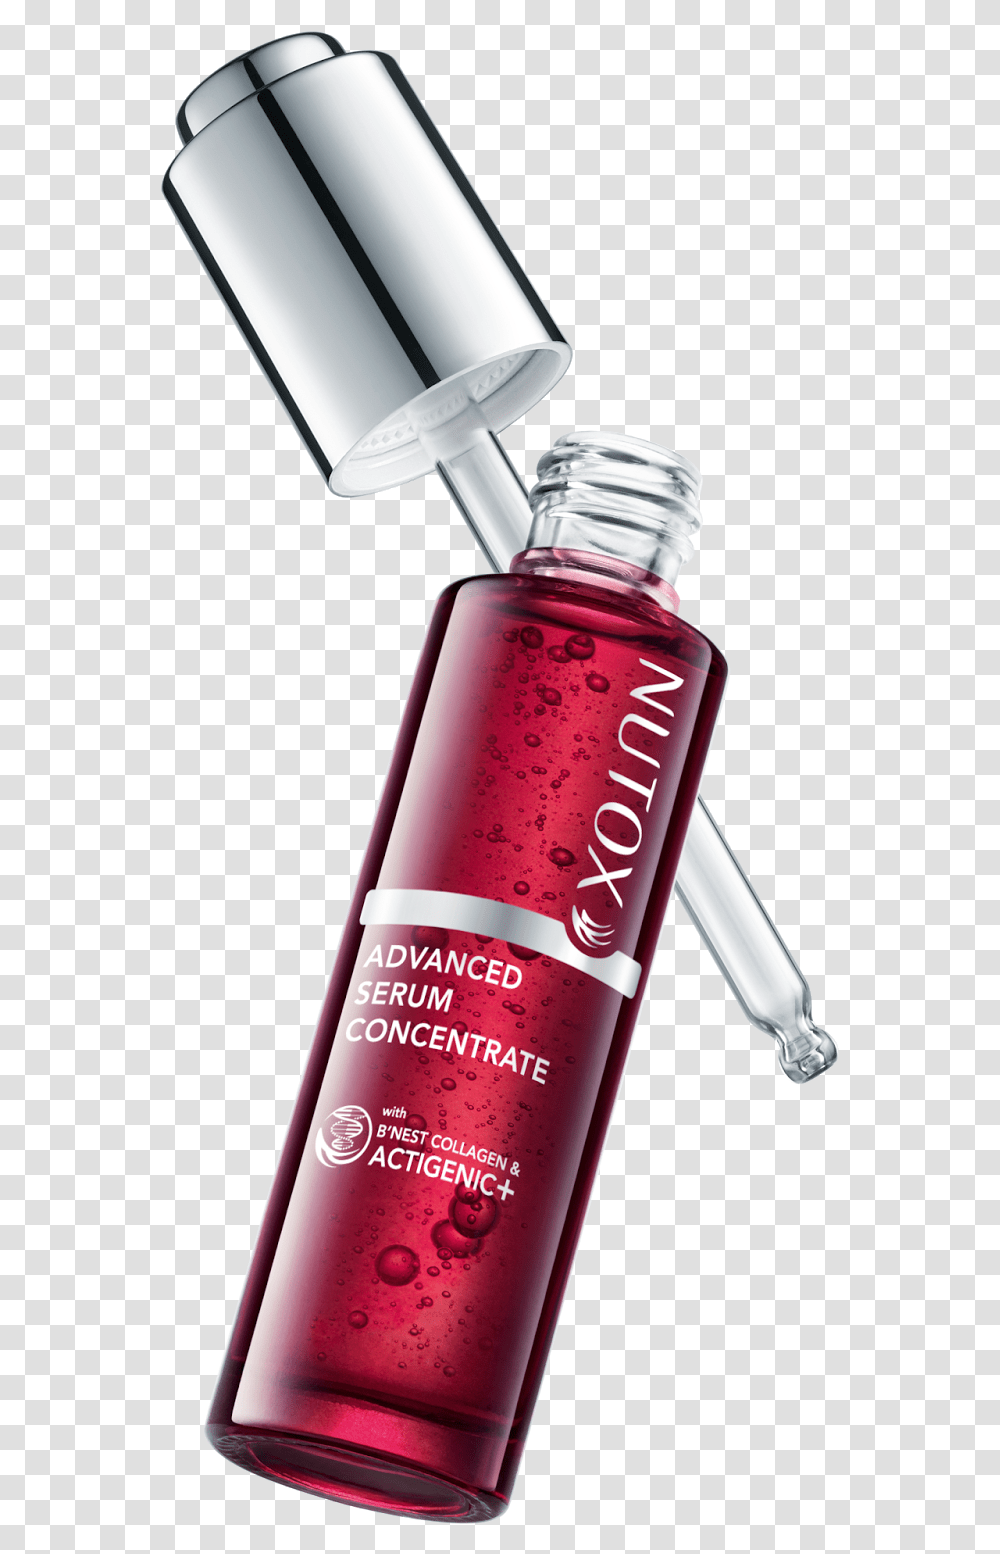 Nutox Advanced Serum Concentrate Pack Shot 1a Nutox Advanced Serum Concentrate, Bottle, Cosmetics, Perfume, Shaker Transparent Png